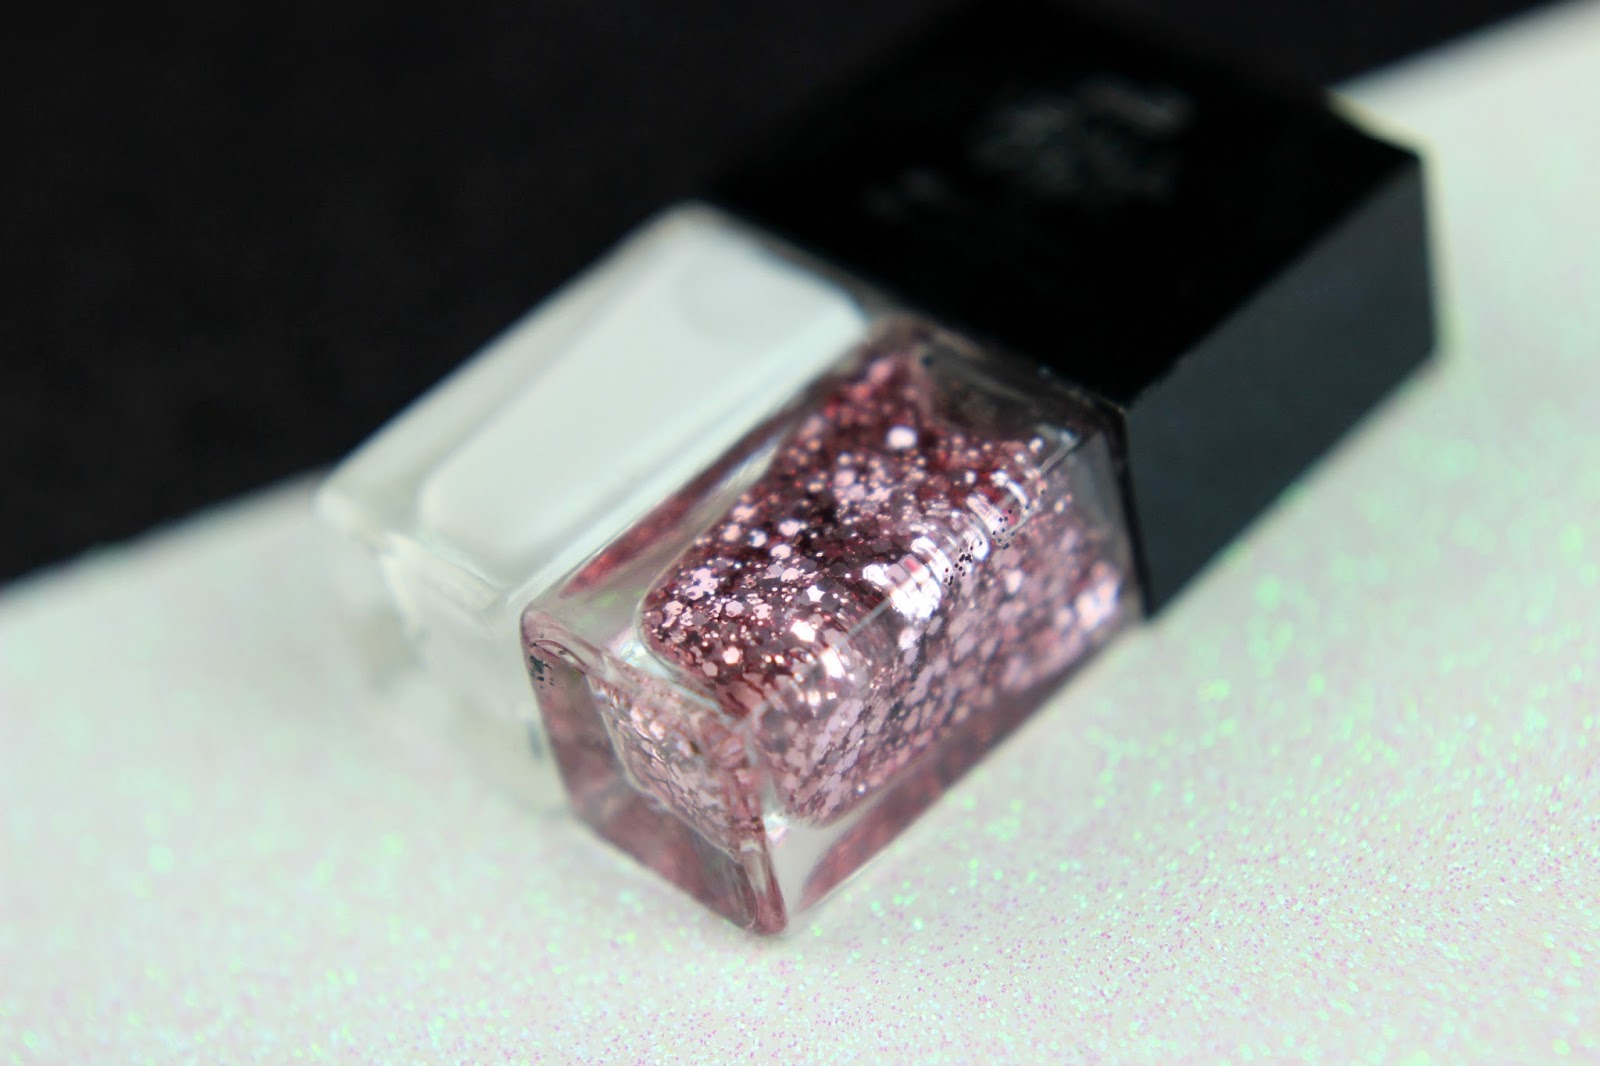 drogerie, glitzer, glow in the dark top coat, latex like eye shadow, lipgloss, nagellack, p2 cosmetics, party look, pink fizz, review, swatches, touch of light loose powder, tragebilder, up all night, 